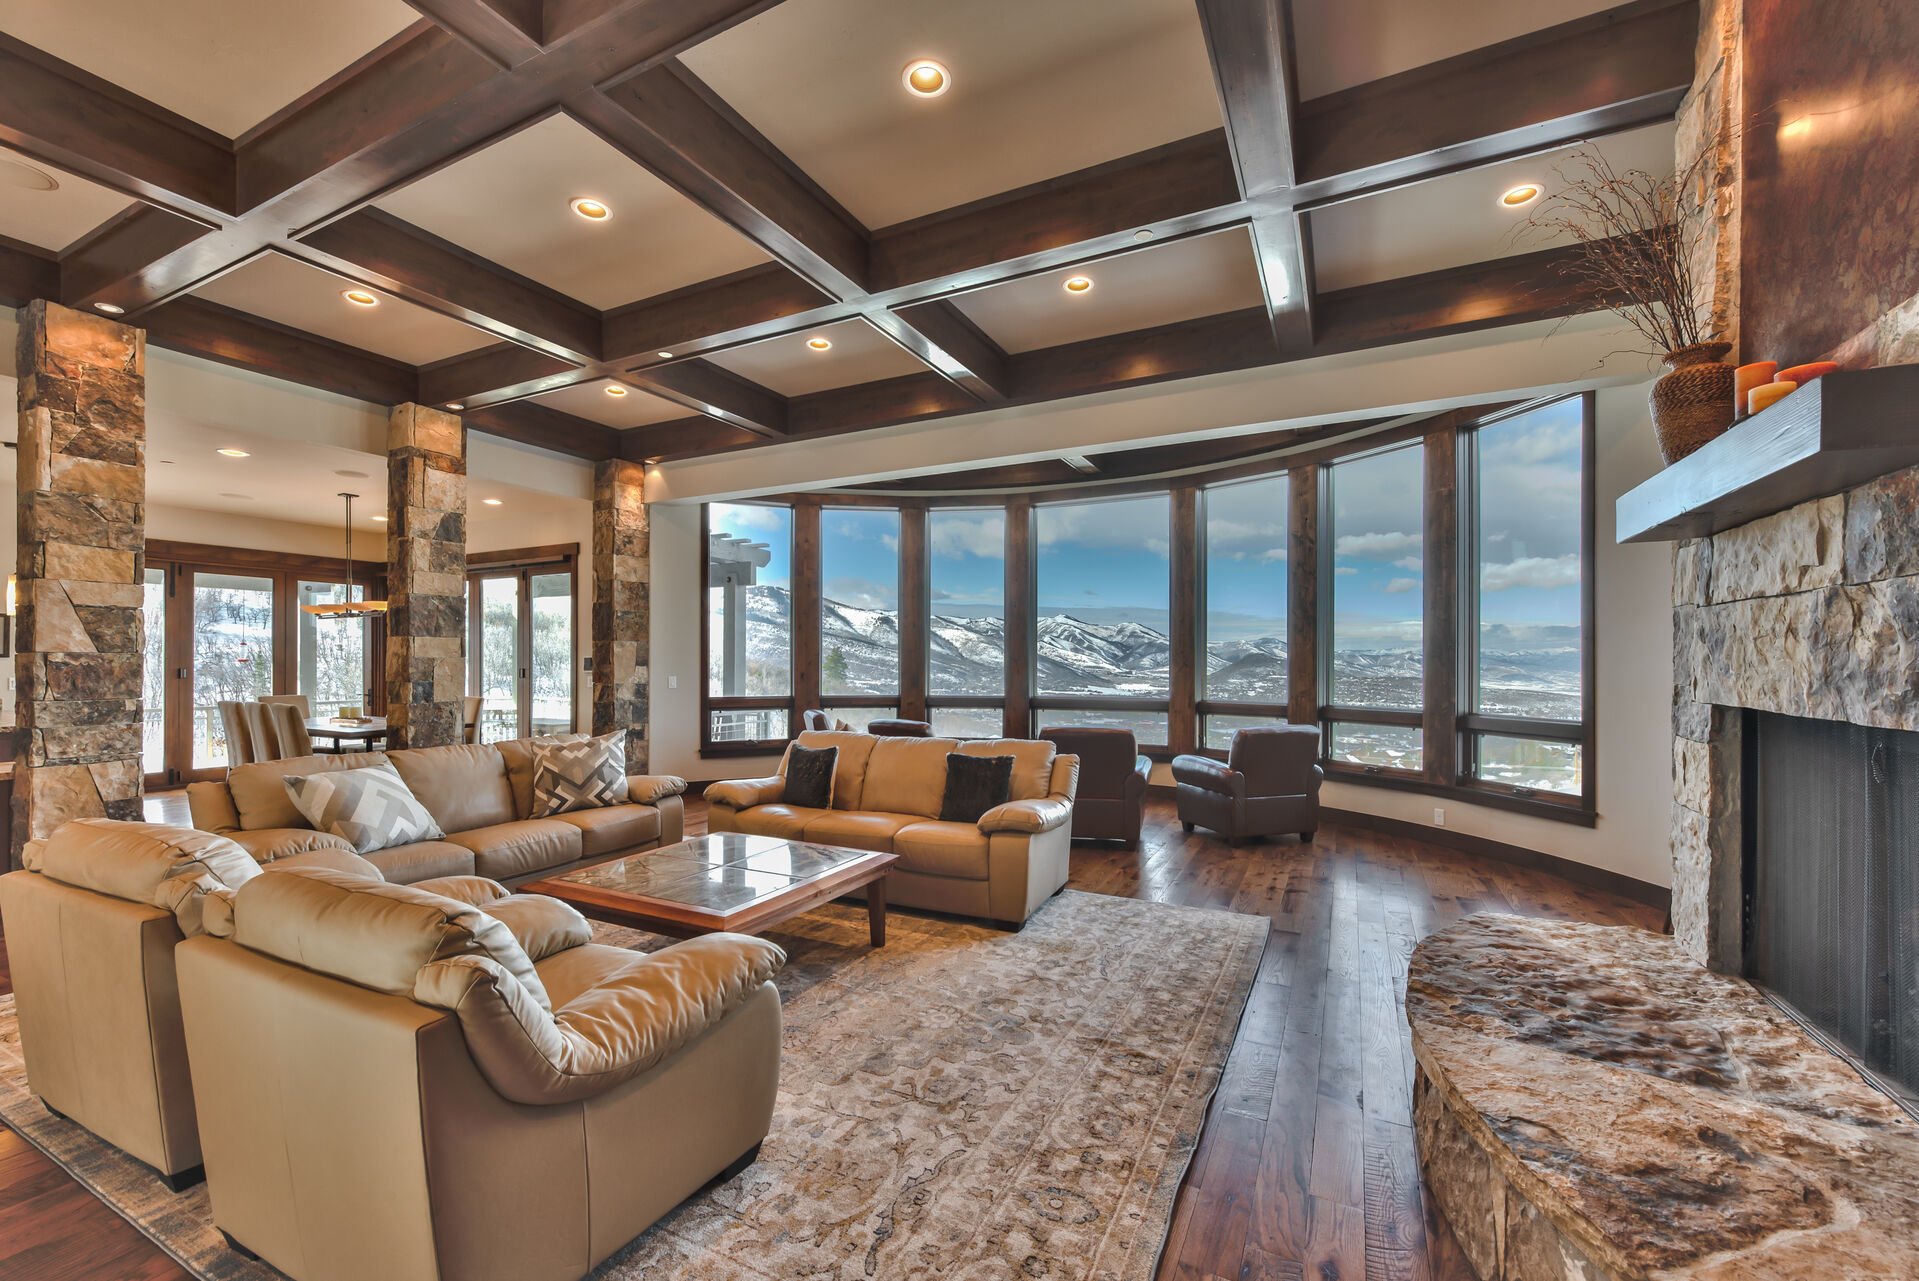 Main Level Living Room with Leather Seating, a Warm Gas Fireplace and Additional Sitting Area to Soak in the Views